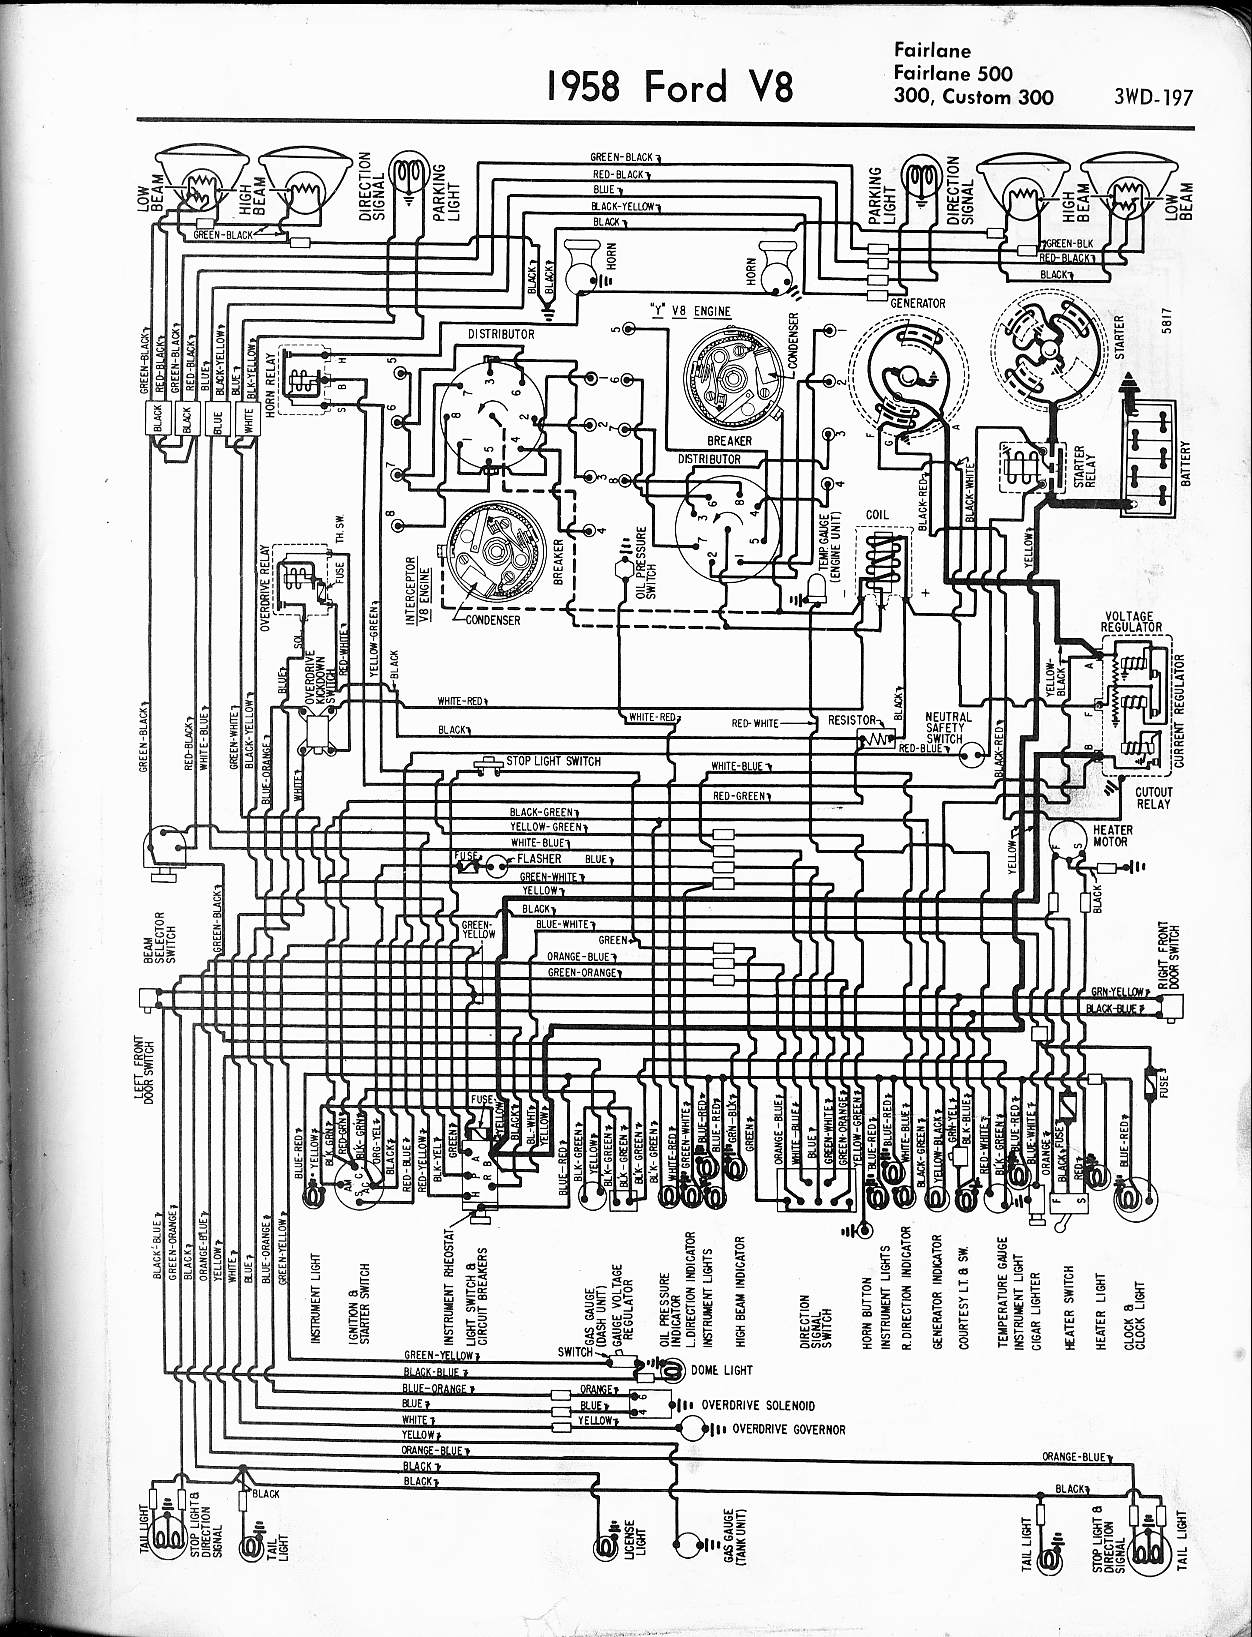 1974 Diagram ford free truck wiring #1